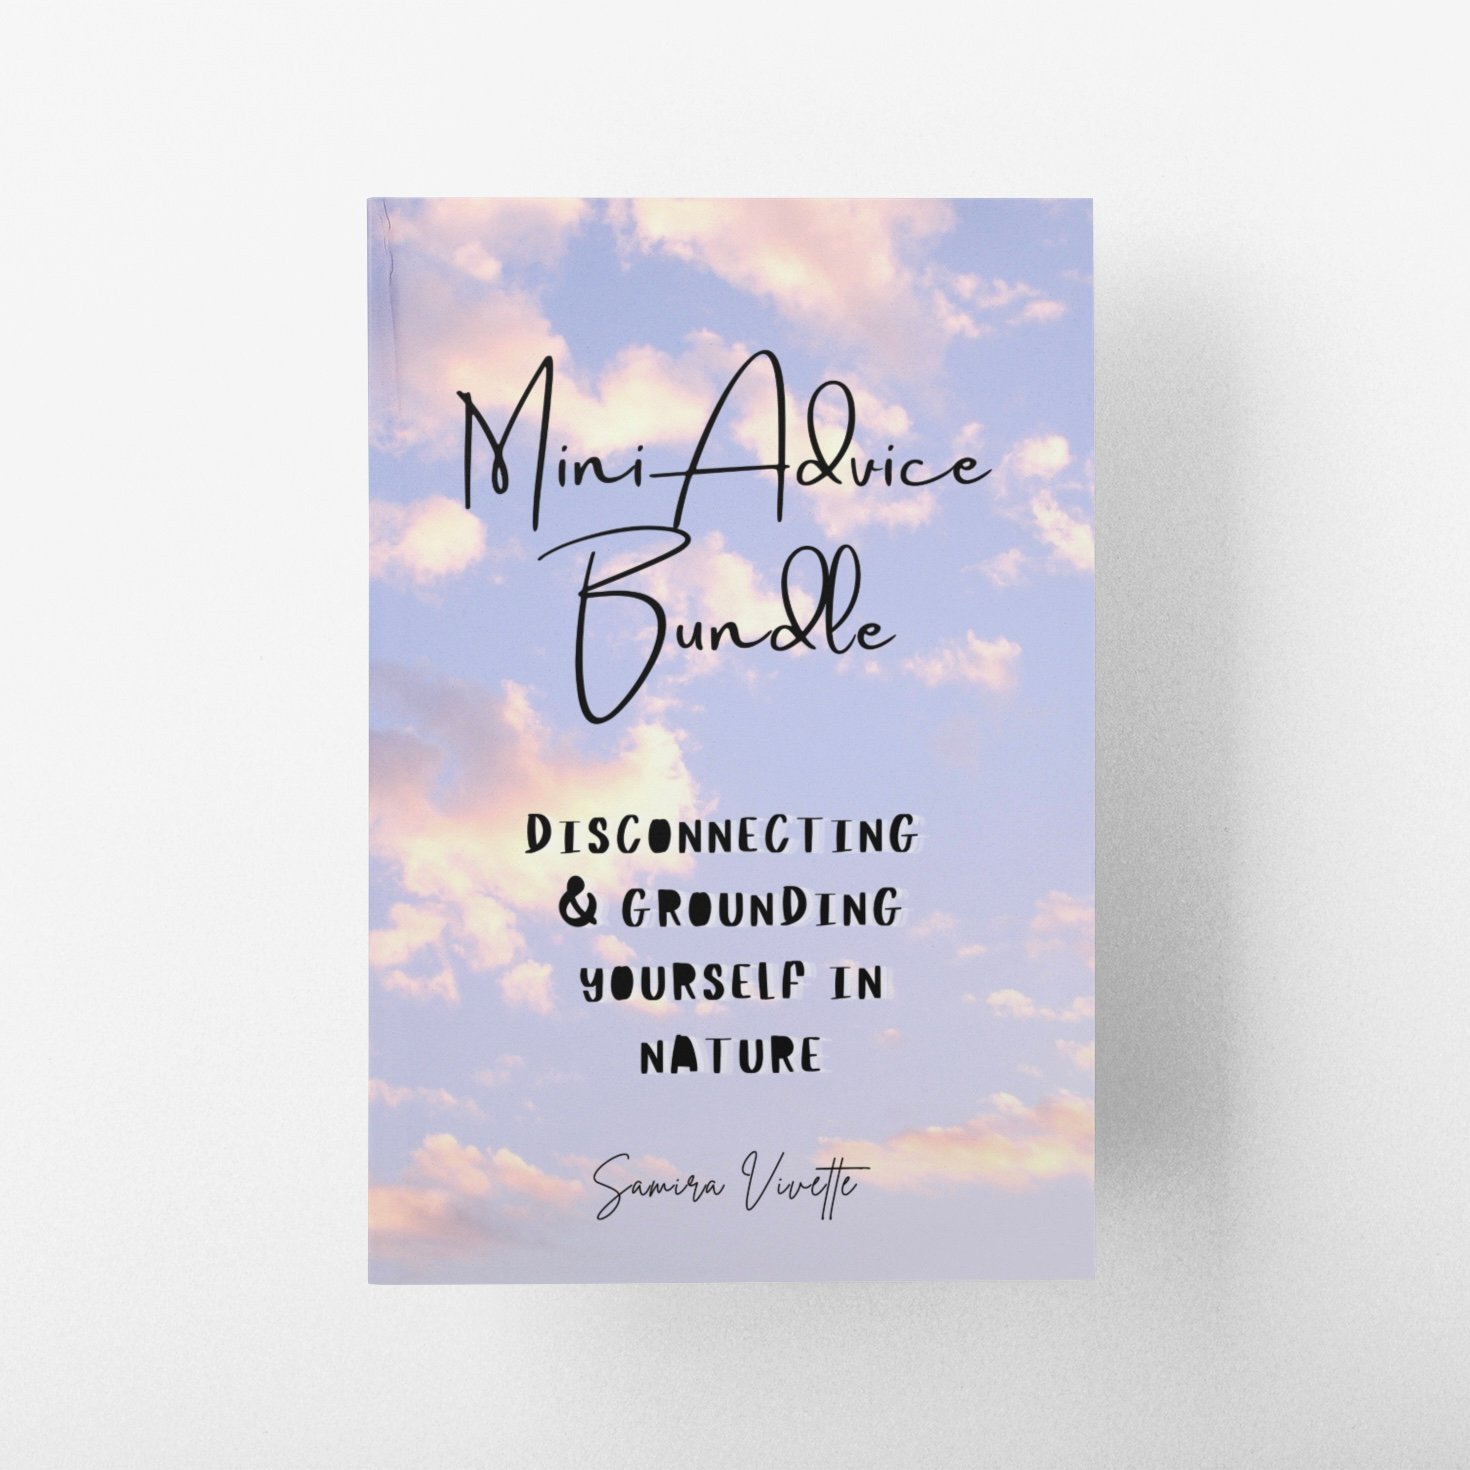 Mini Advice Bundle - Disconnecting and Grounding Yourself in Nature